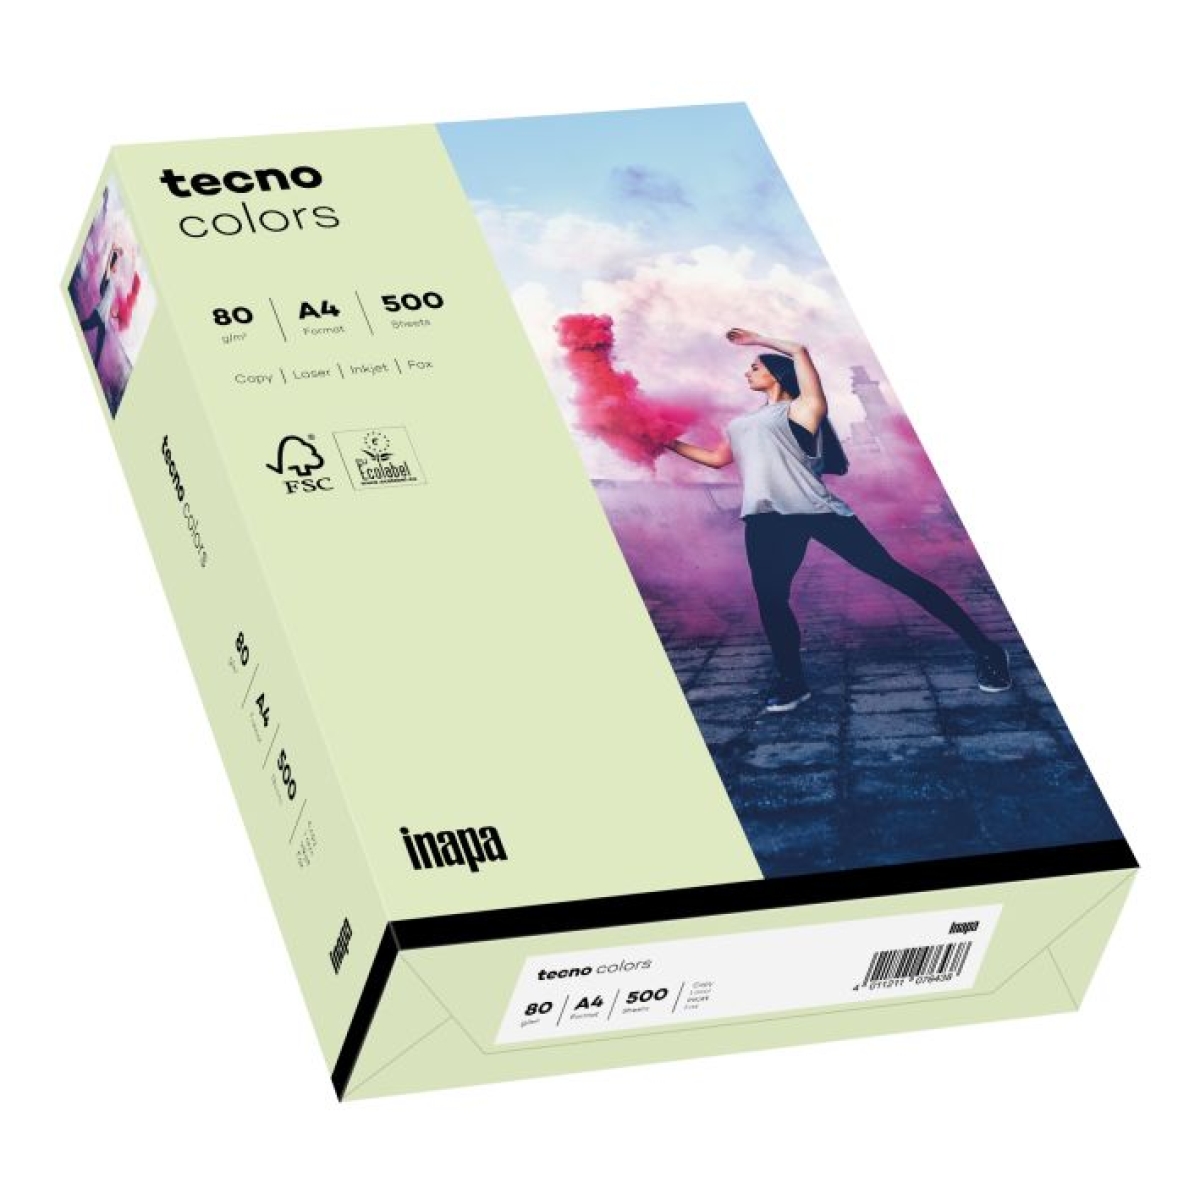 InapaCopy paper tecno colors A4 80g 500 sheets light green-Price for 500SheetArticle-No: 4011211076919